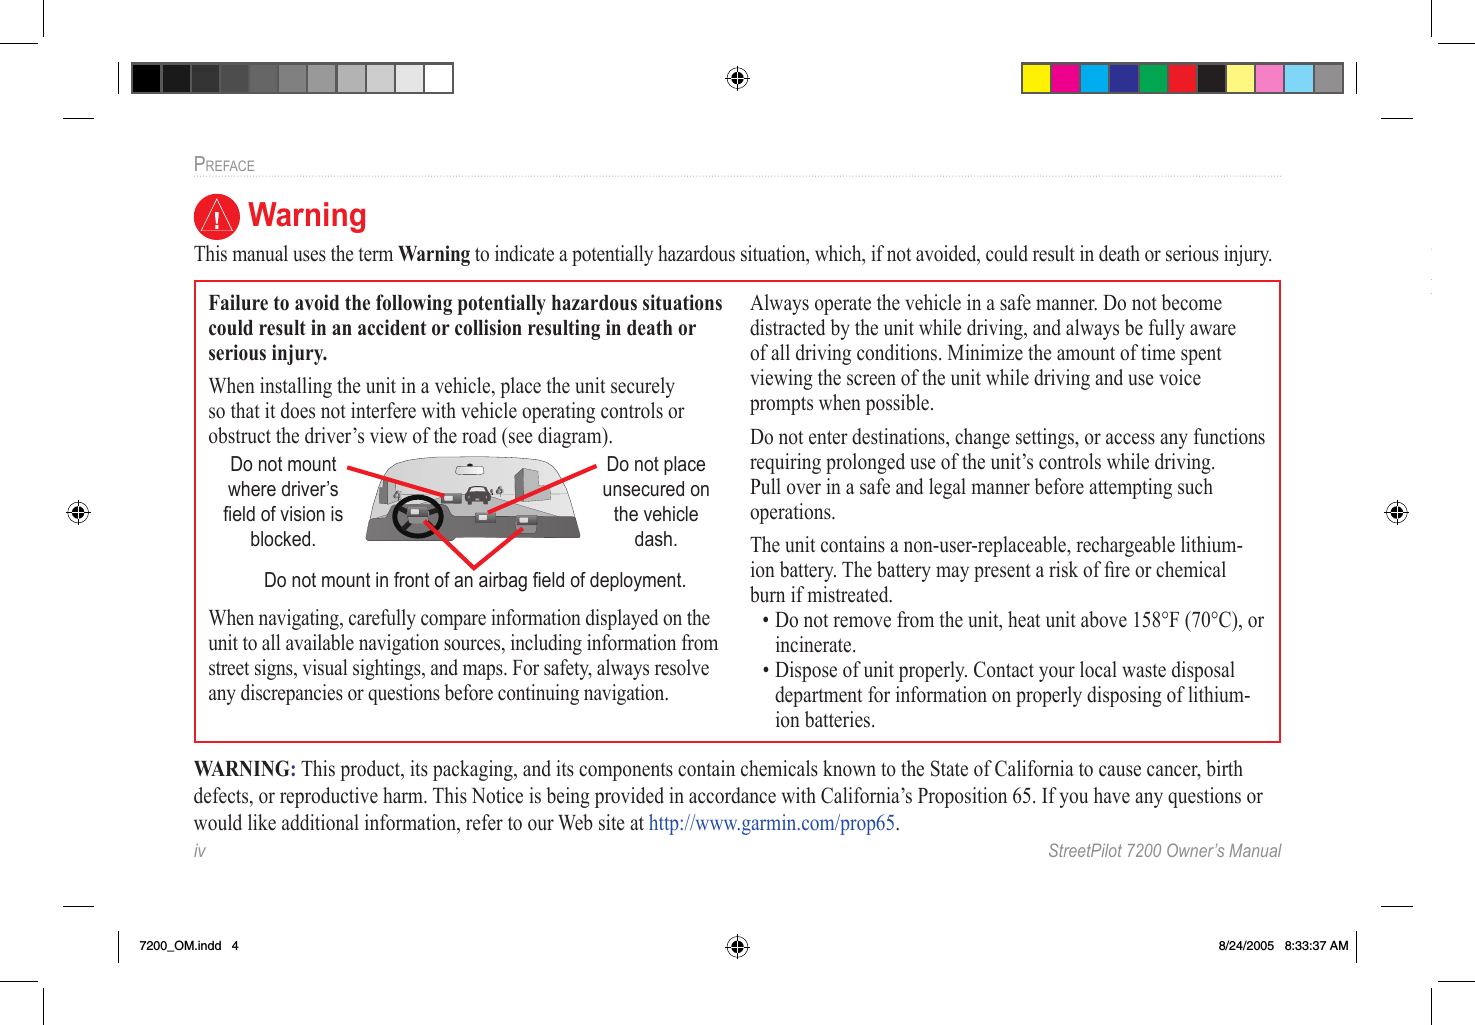 iv  StreetPilot 7200 Owner’s ManualPREFACE WarningThis manual uses the term Warning to indicate a potentially hazardous situation, which, if not avoided, could result in death or serious injury.Failure to avoid the following potentially hazardous situations could result in an accident or collision resulting in death or serious injury.When installing the unit in a vehicle, place the unit securely so that it does not interfere with vehicle operating controls or obstruct the driver’s view of the road (see diagram).Do not mount where driver’s ﬁeld of vision is blocked.Do not place unsecured on the vehicle dash.Do not mount in front of an airbag ﬁeld of deployment.When navigating, carefully compare information displayed on the unit to all available navigation sources, including information from street signs, visual sightings, and maps. For safety, always resolve any discrepancies or questions before continuing navigation.Always operate the vehicle in a safe manner. Do not become distracted by the unit while driving, and always be fully aware of all driving conditions. Minimize the amount of time spent viewing the screen of the unit while driving and use voice prompts when possible. Do not enter destinations, change settings, or access any functions requiring prolonged use of the unit’s controls while driving. Pull over in a safe and legal manner before attempting such operations.The unit contains a non-user-replaceable, rechargeable lithium-ion battery. The battery may present a risk of ﬁre or chemical burn if mistreated. • Do not remove from the unit, heat unit above 158°F (70°C), or incinerate. • Dispose of unit properly. Contact your local waste disposal department for information on properly disposing of lithium-ion batteries.WARNING: This product, its packaging, and its components contain chemicals known to the State of California to cause cancer, birth defects, or reproductive harm. This Notice is being provided in accordance with California’s Proposition 65. If you have any questions or would like additional information, refer to our Web site at http://www.garmin.com/prop65. CautionThis manual uses the term Caution to indicate a potentially hazardous situation, which, if not avoided, may result in minor injury or property damage. It may also be used without the symbol to alert you to avoid unsafe practices.7200_OM.indd   4 8/24/2005   8:33:37 AM